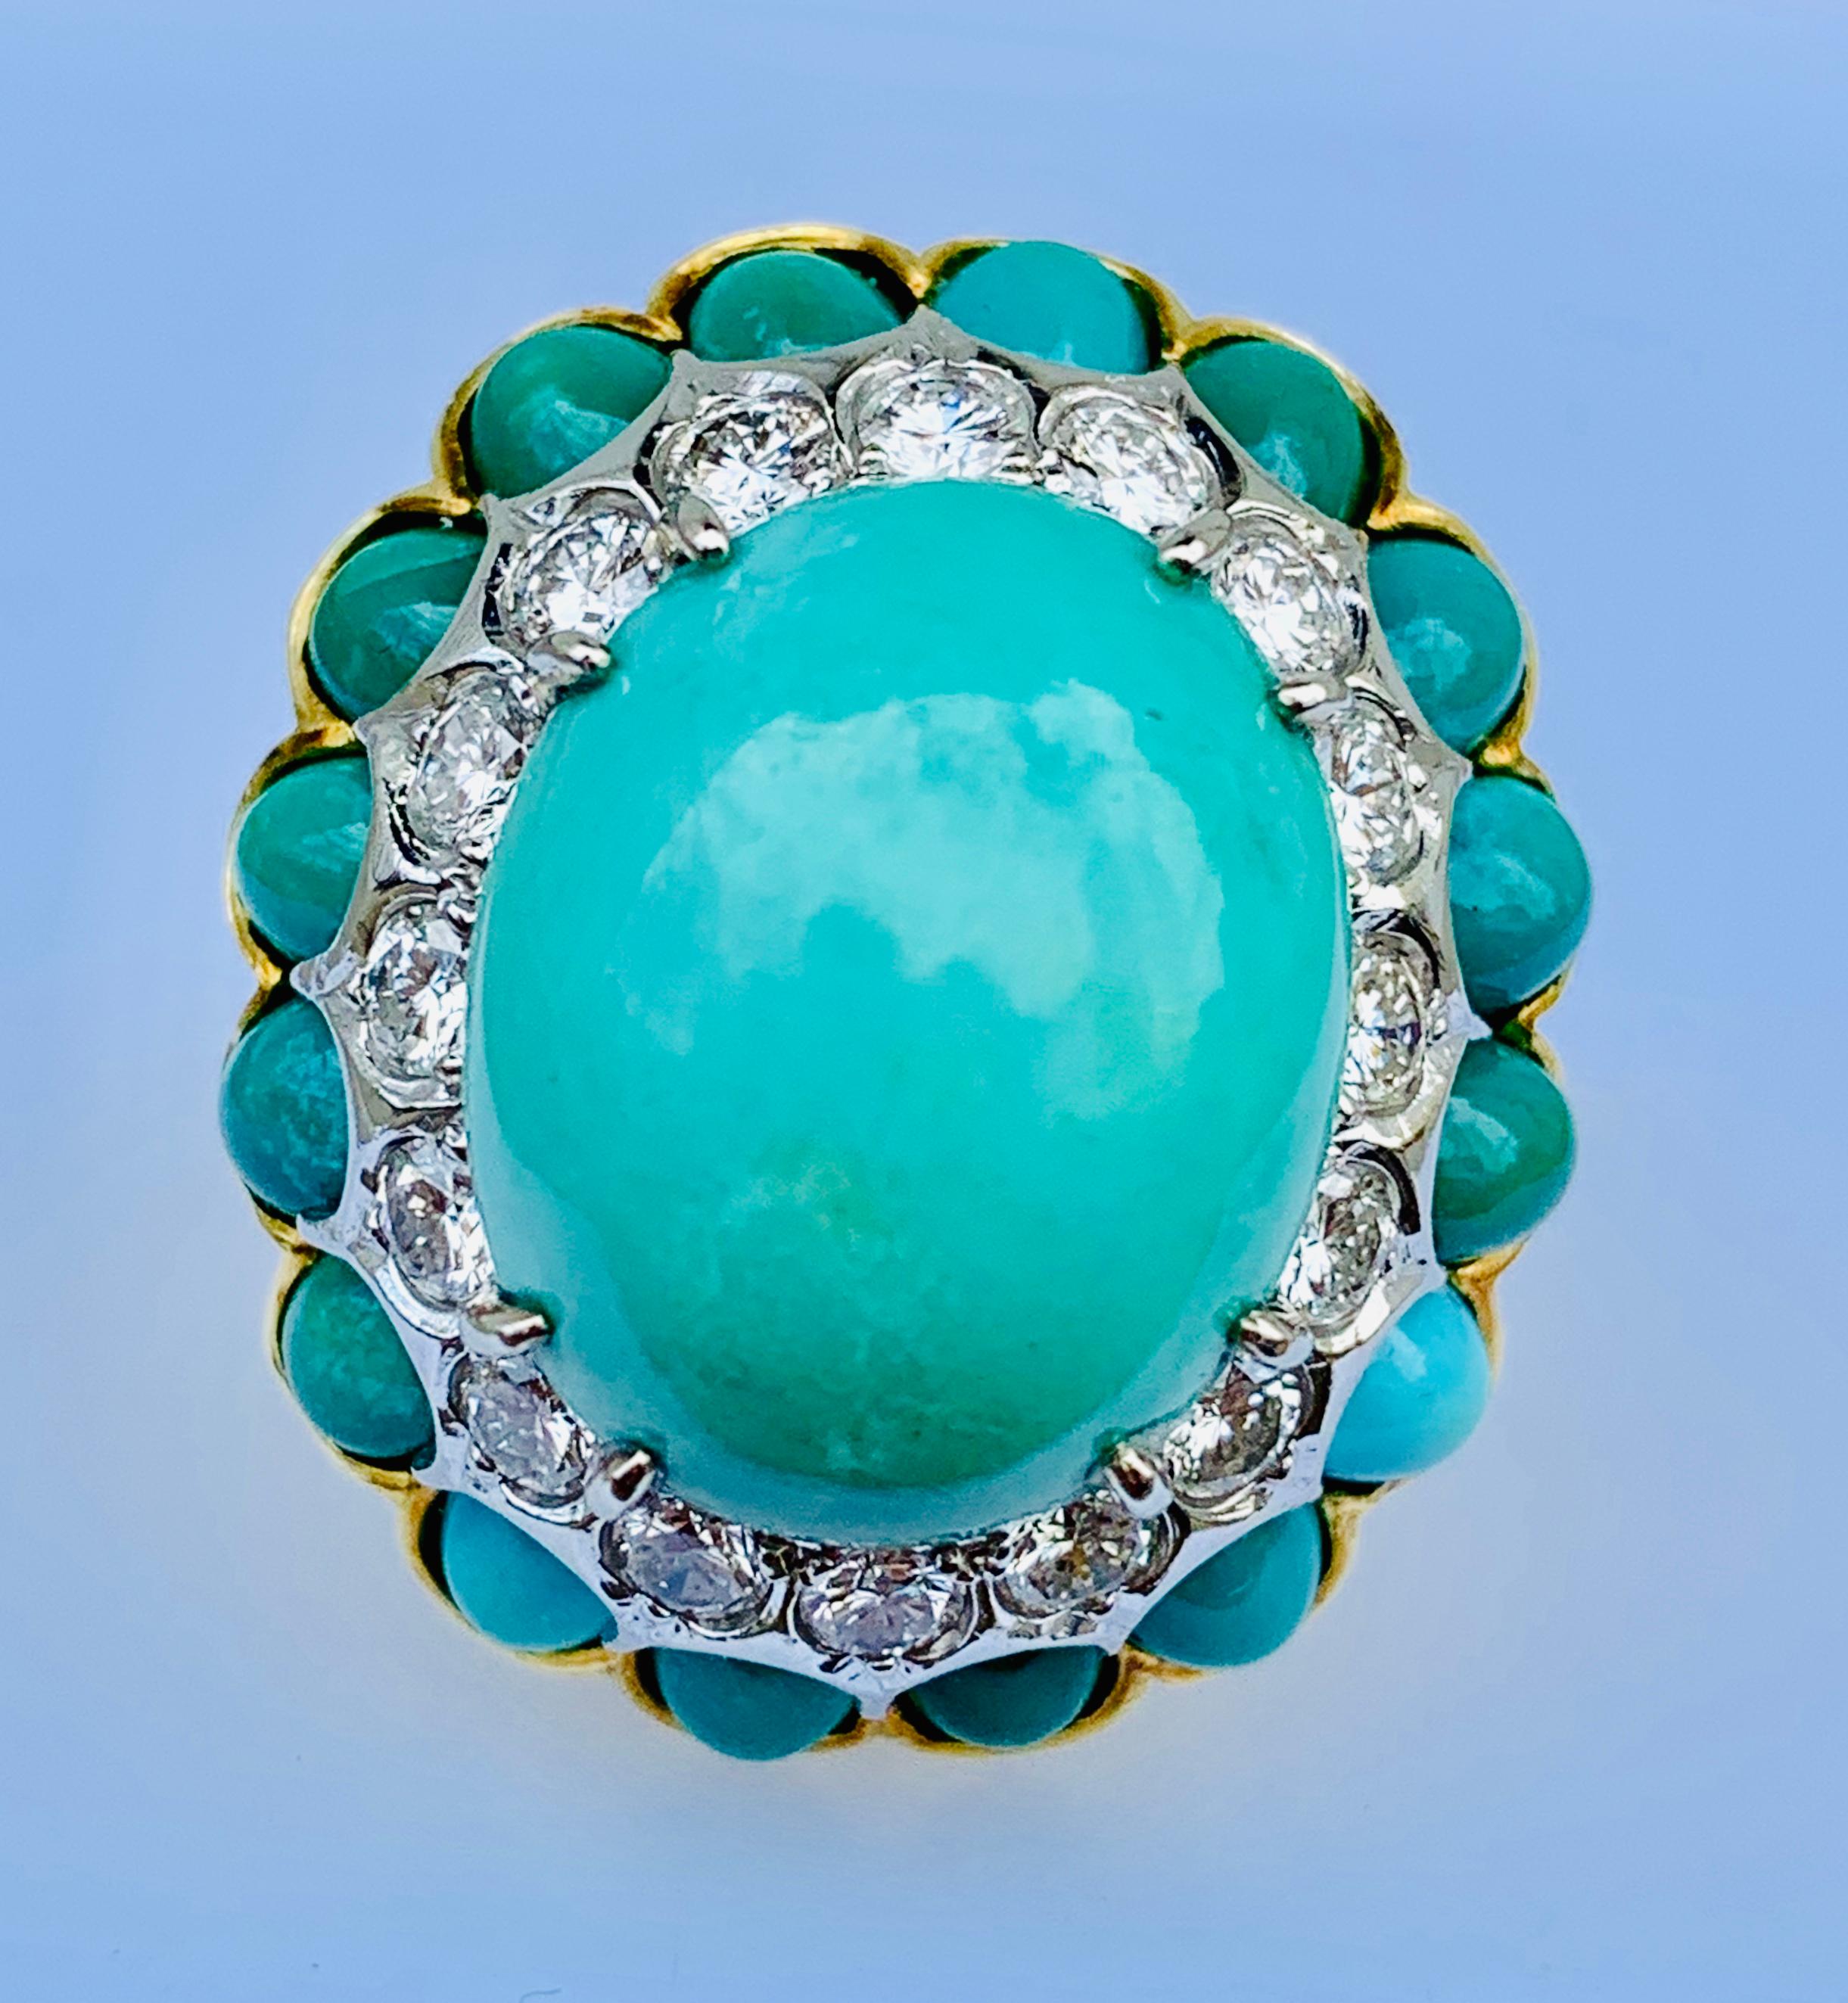 Gorgeous Vintage la Triomphe Ladies Dome Ring! This piece is made in 18K yellow Gold and has a stunning 17 x 14mm Oval Turquoise at its center! The center stone is surrounded by a band of 16, round, brilliant cut diamonds that are G-H in color and